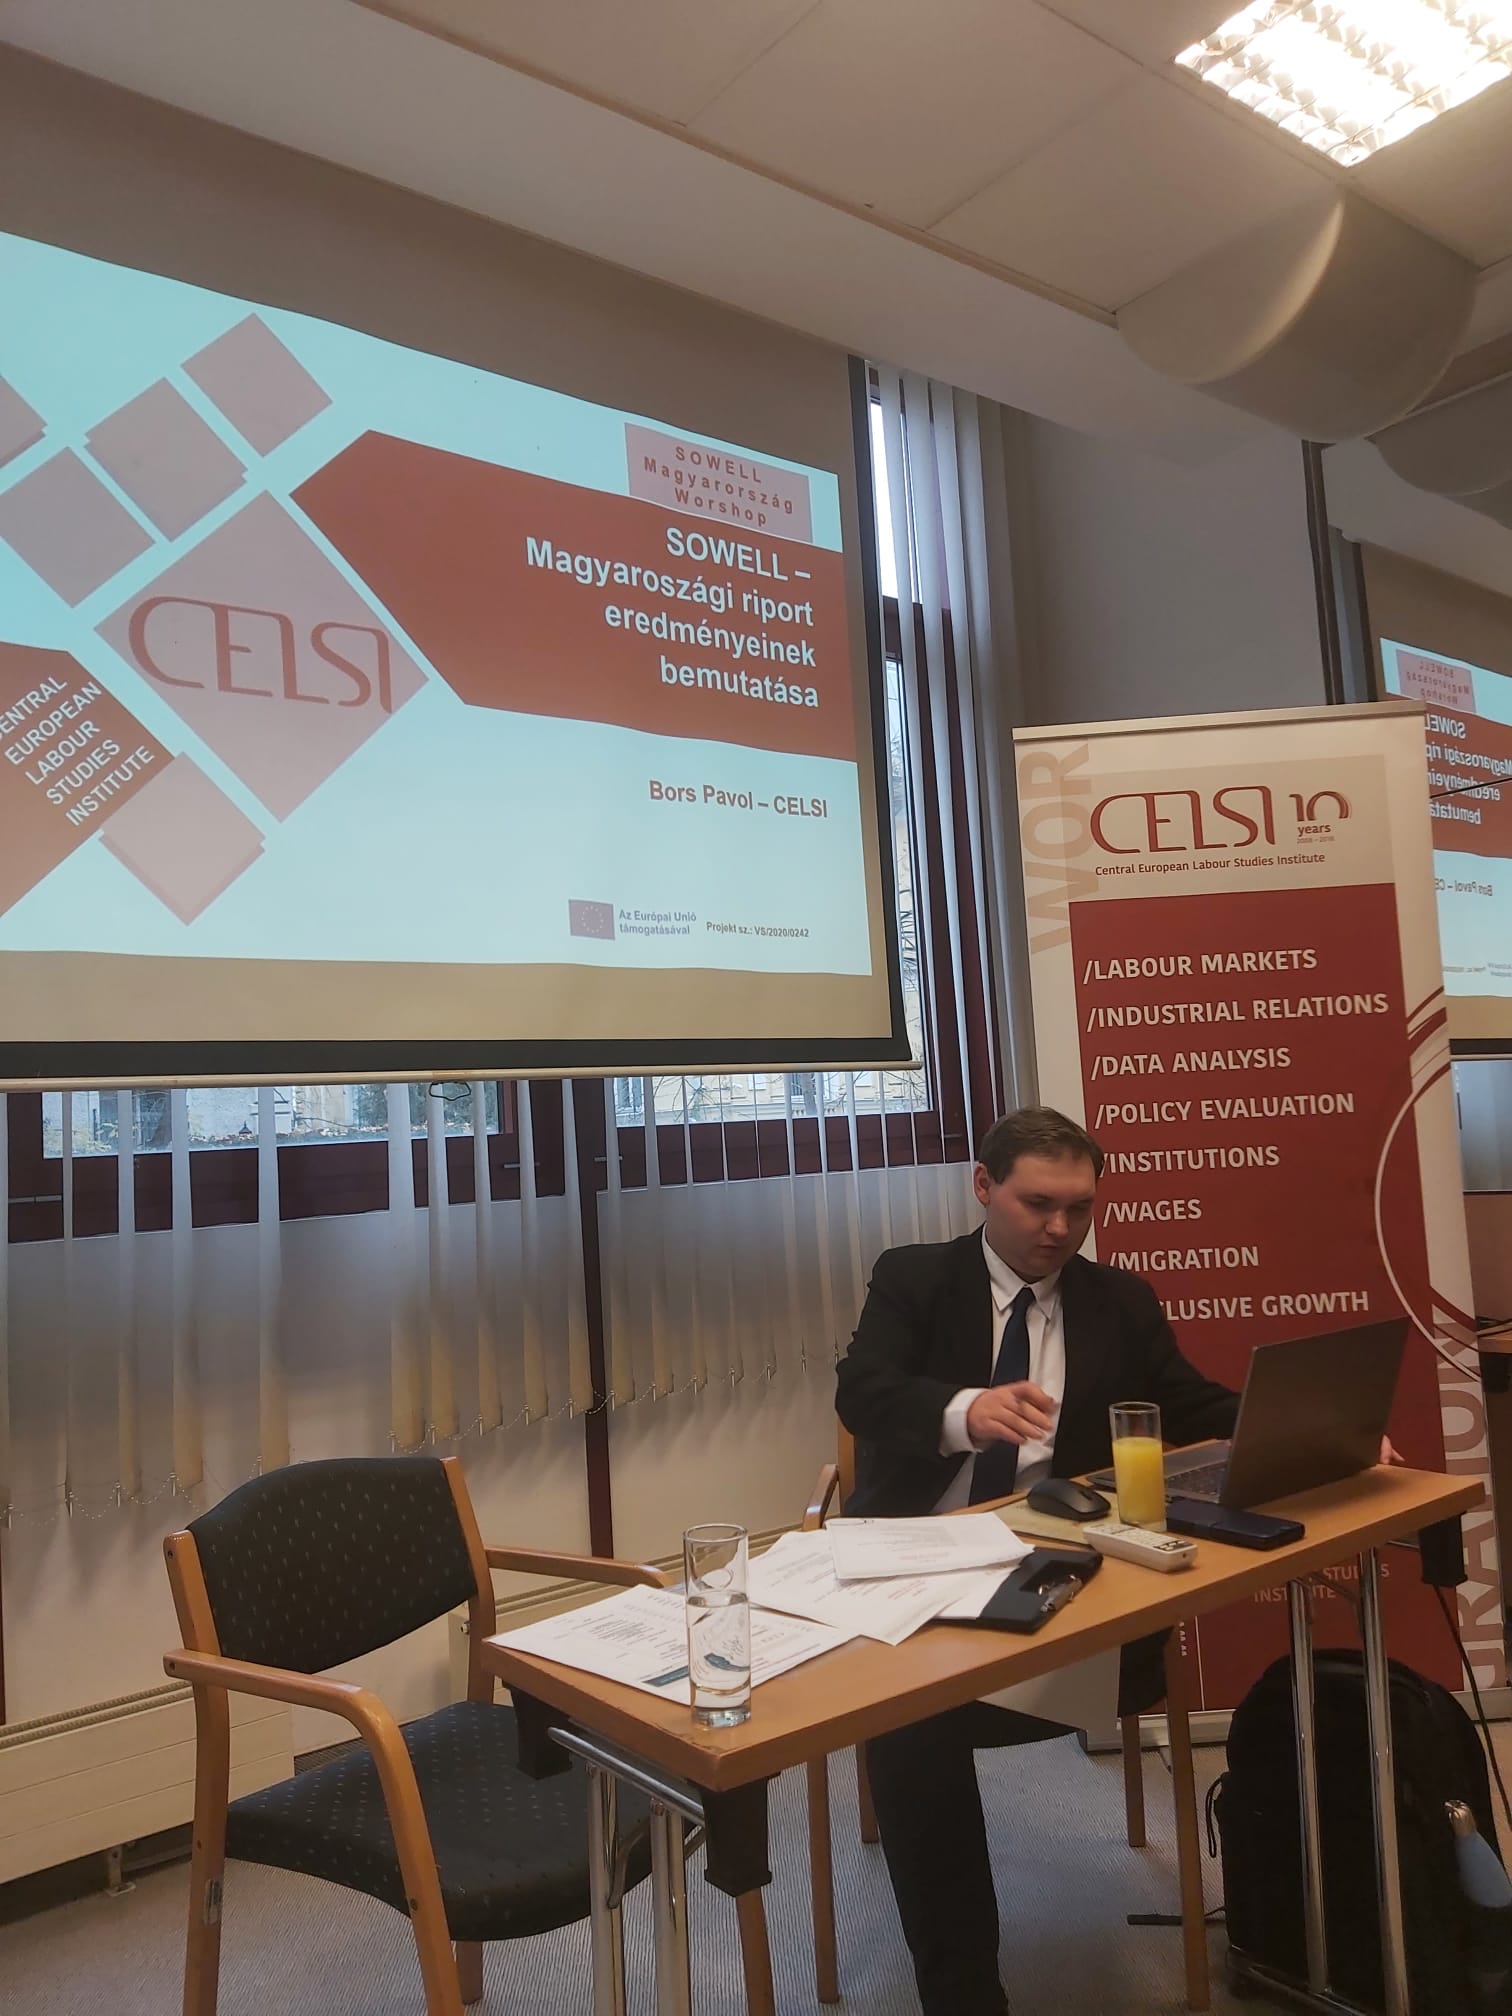 CELSI organised a national workshop within the SOWELL project, titled "Early childhood education and care and long-term care in Hungary" in Budapest